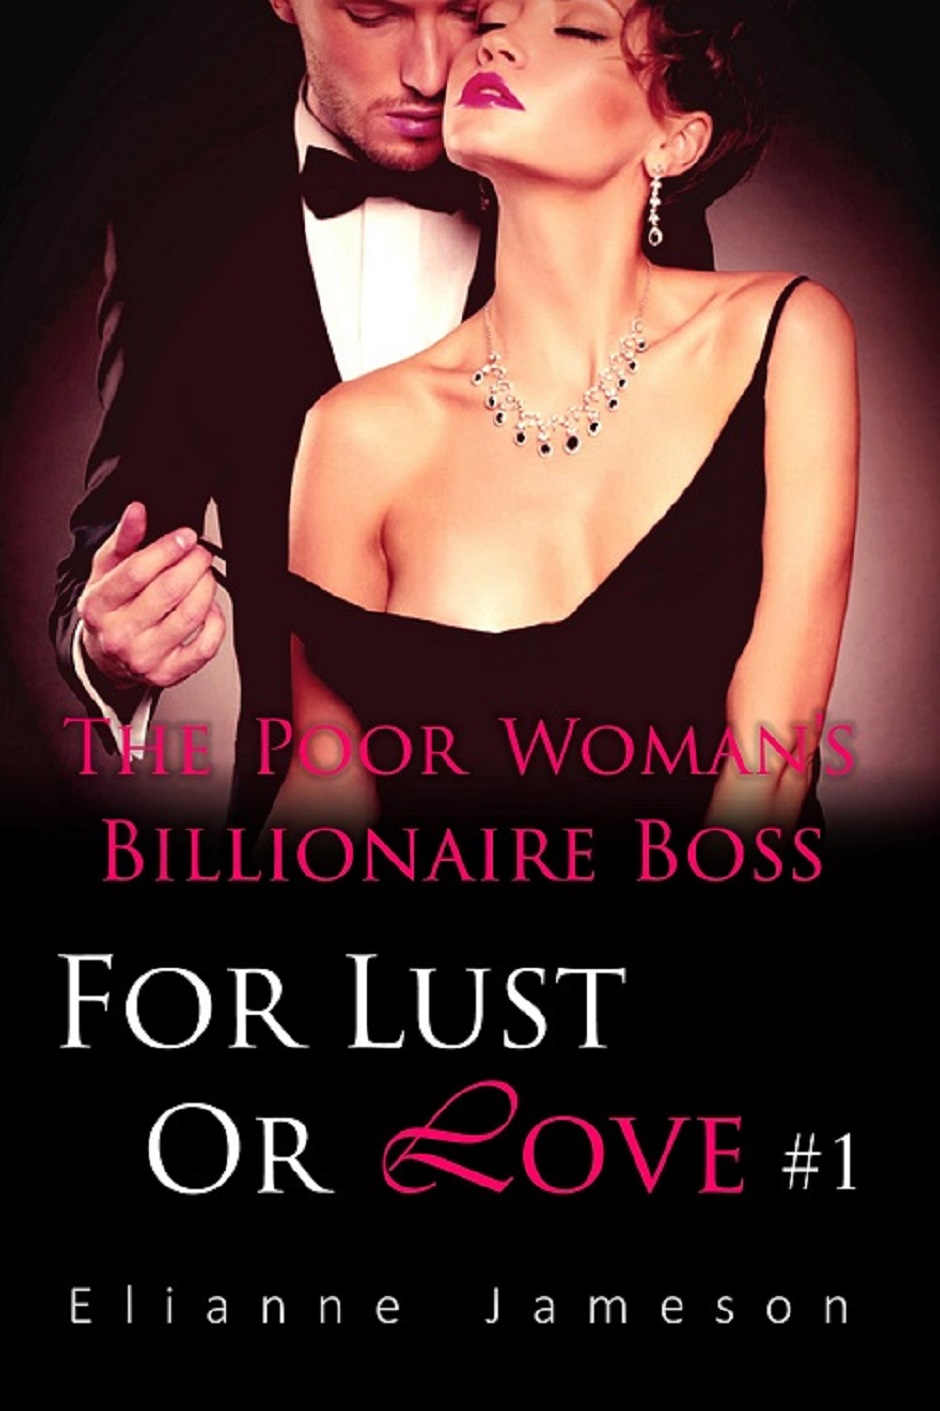 The Poor Woman’s Billionaire Boss: For Lust Or Love(Part 1) by Elianne Jameson